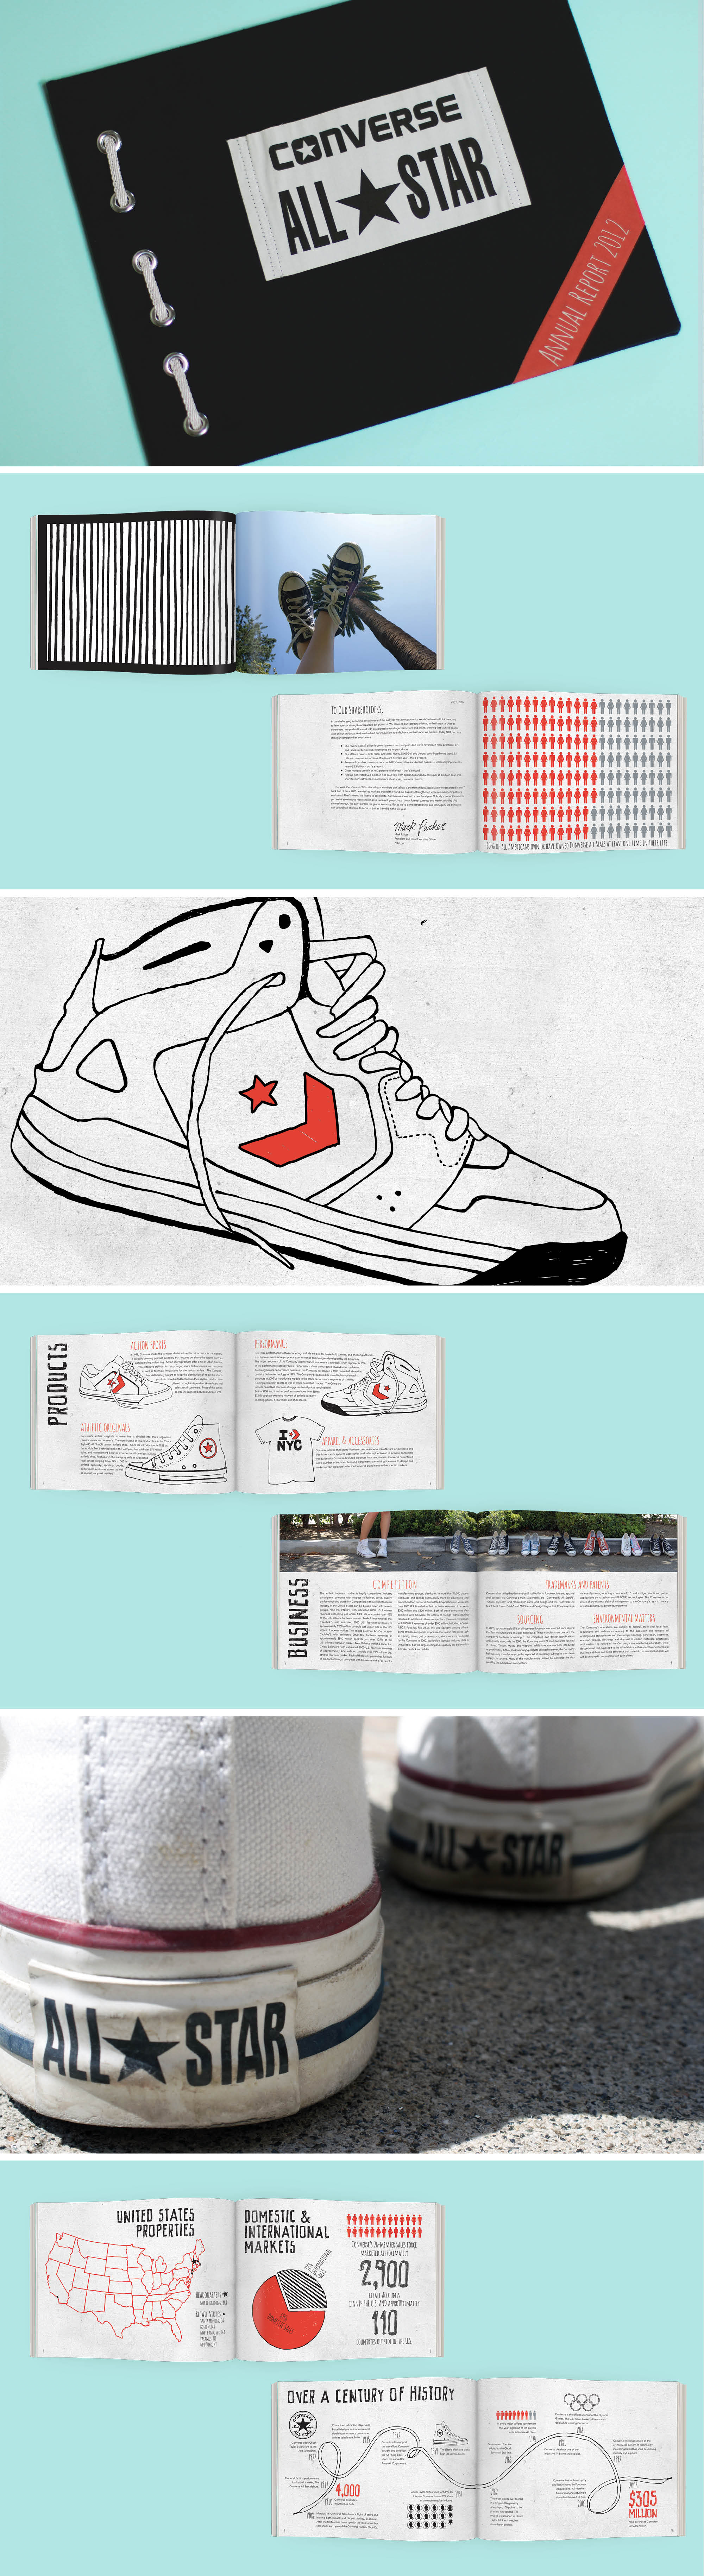 Converse. Design by Margomade.